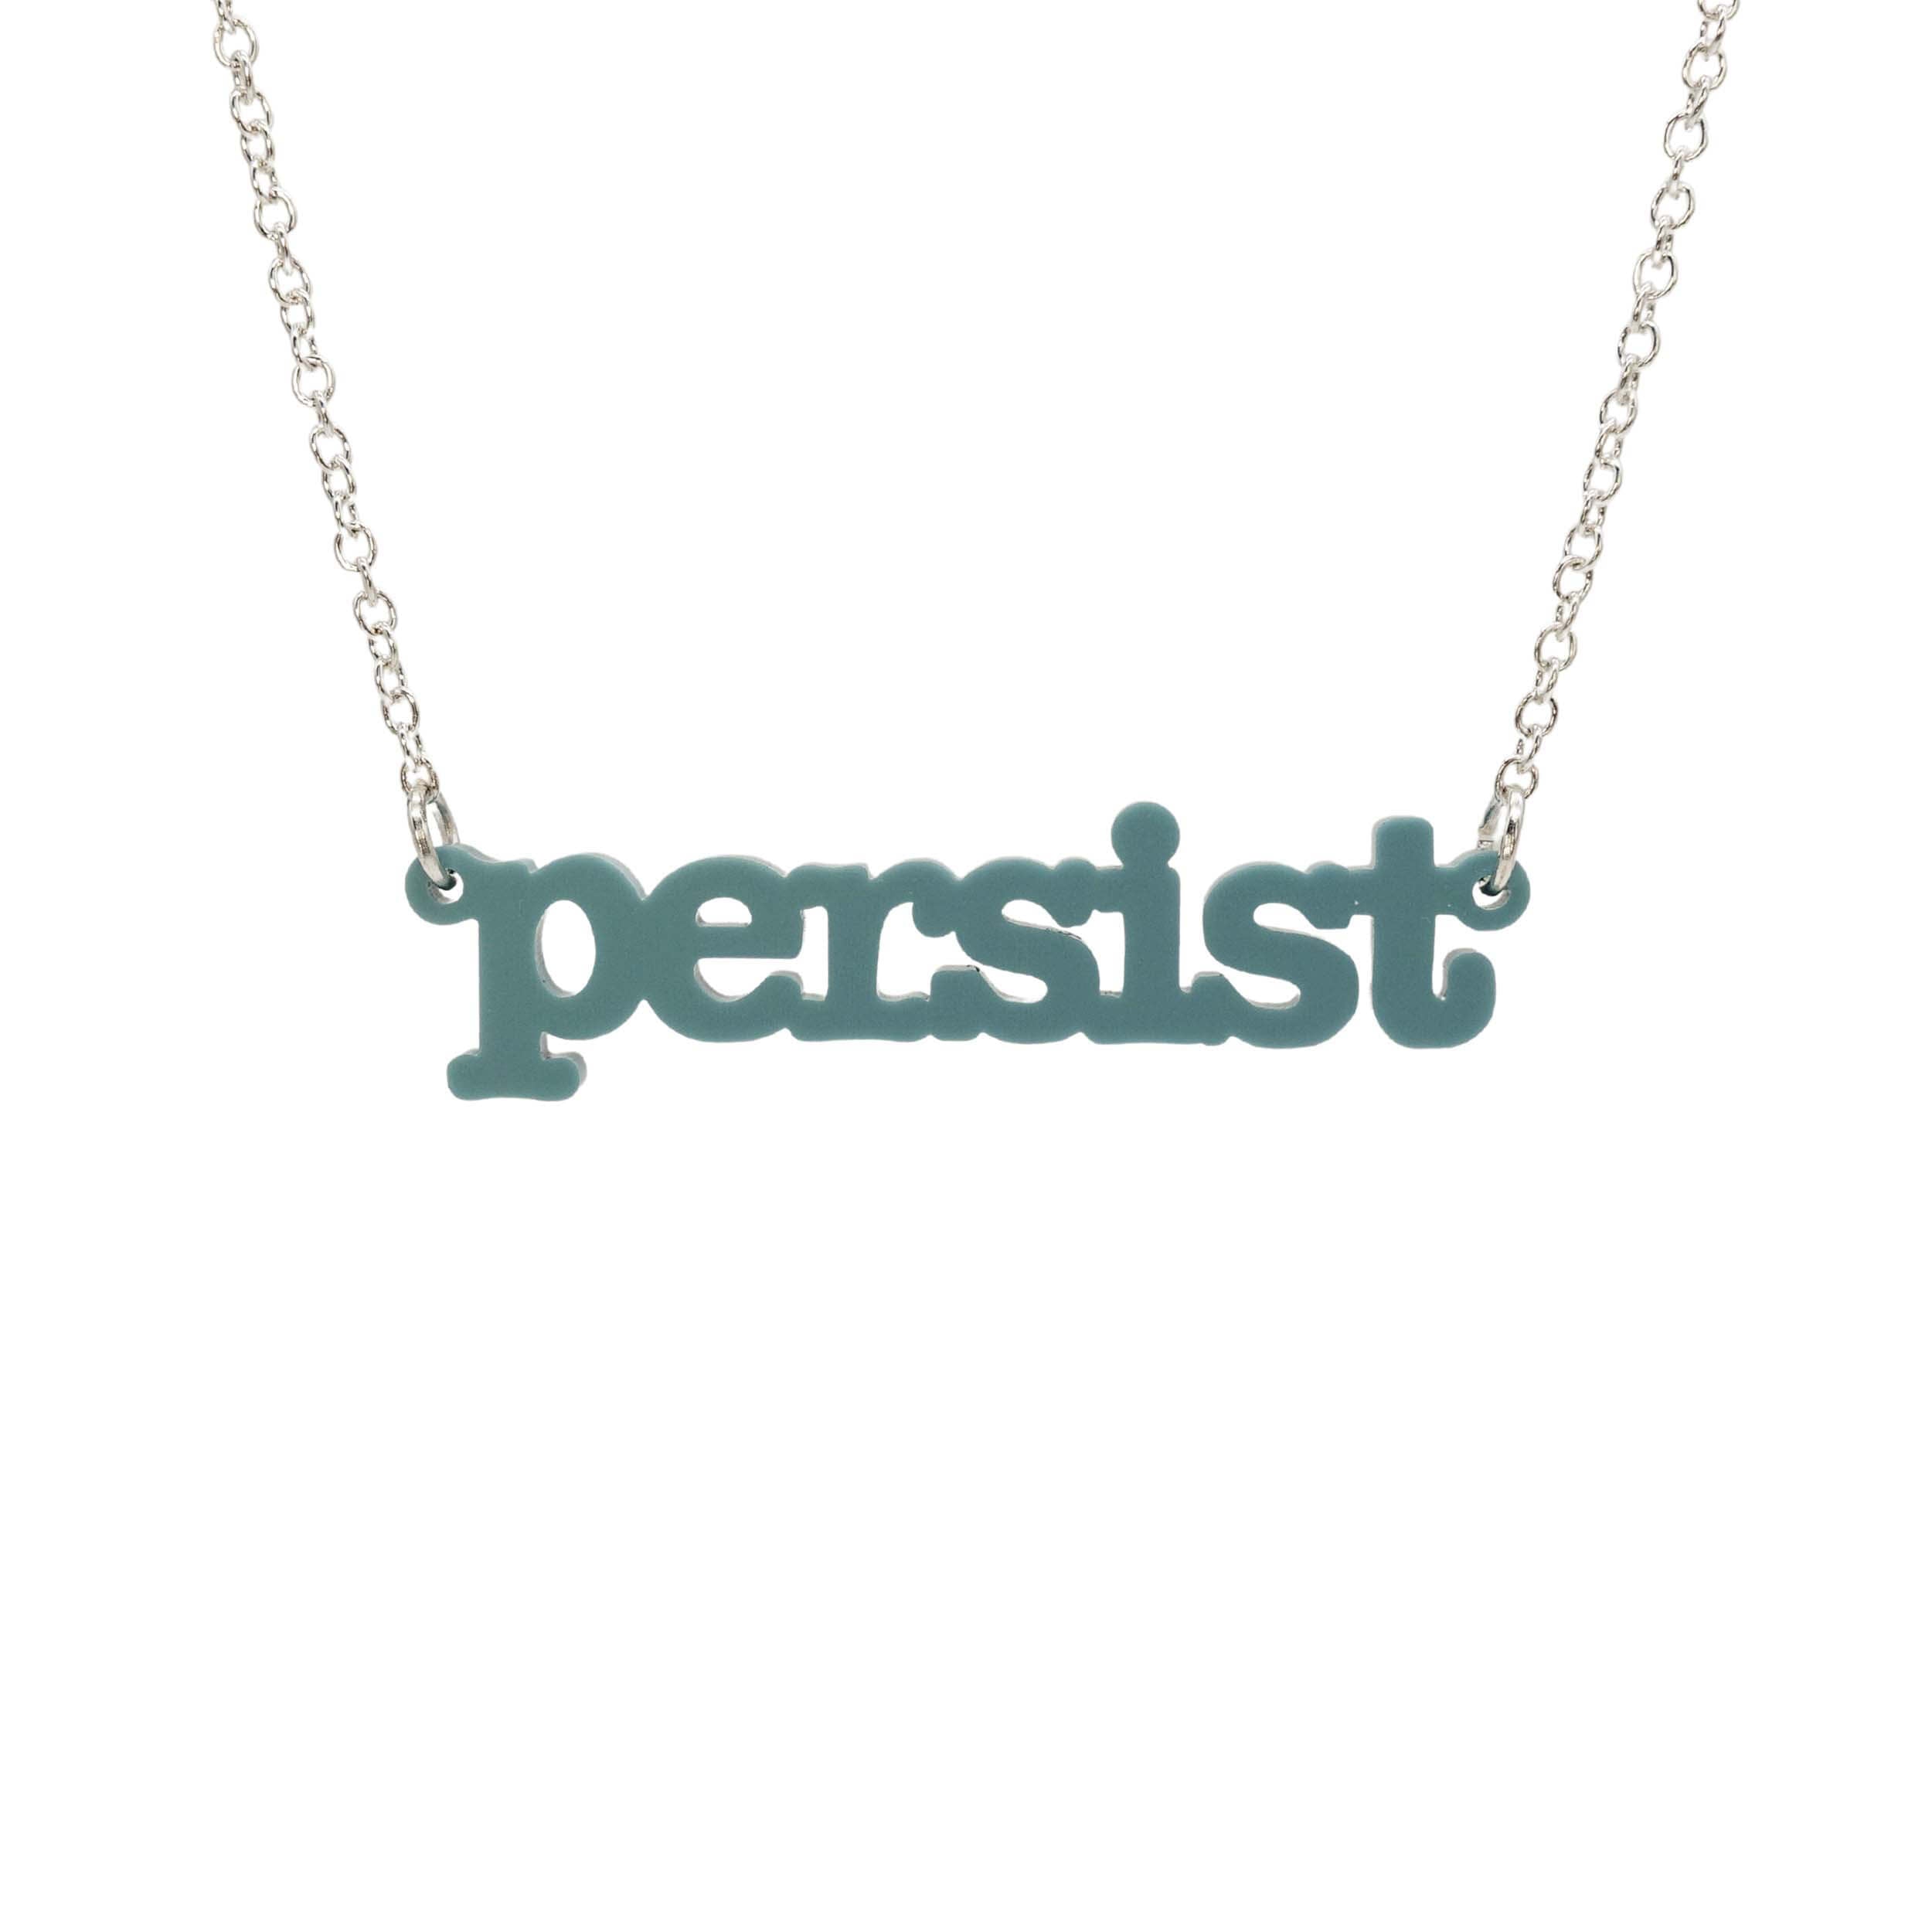 Duck egg green Persist necklace in typewriter font hanging on a silver chain against a white background. 